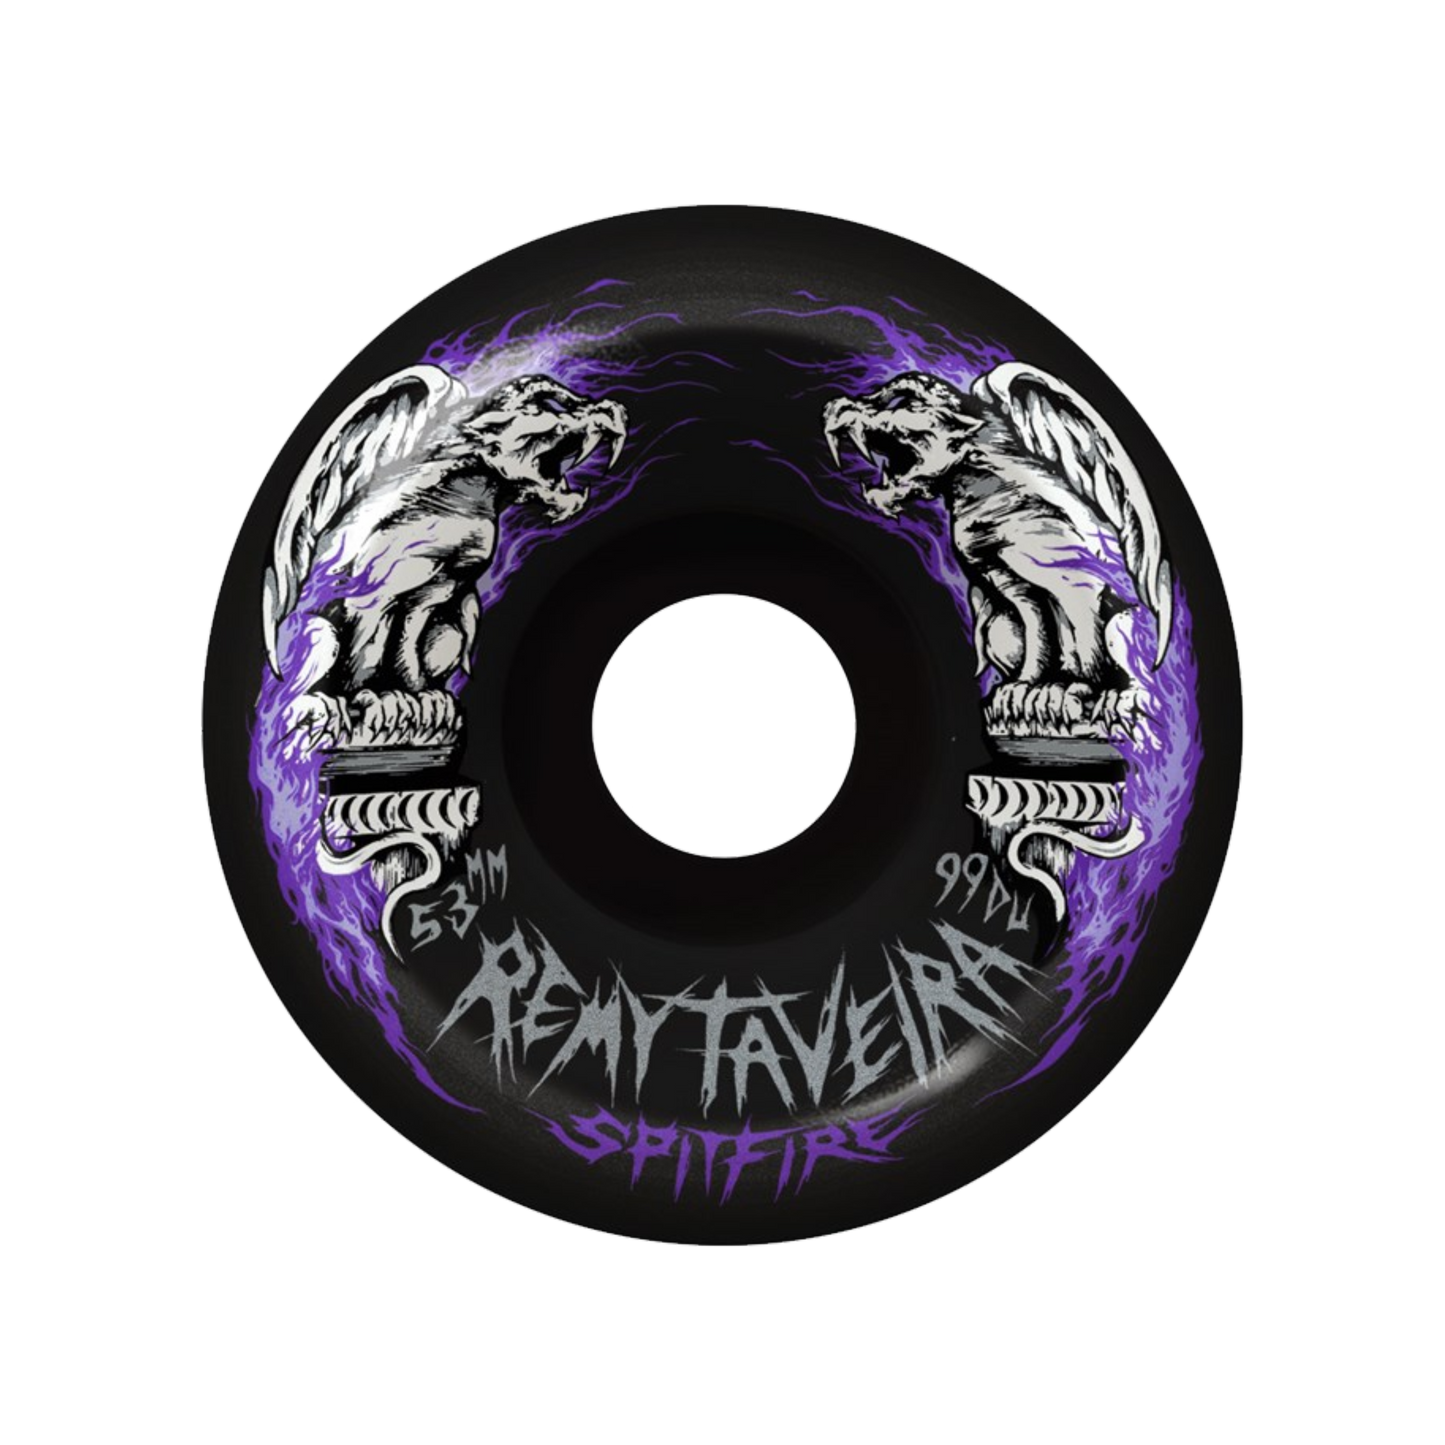 Spitfire Remy Taveira Formula Four Conical Full Wheels 99 Duro - 53mm -  SET